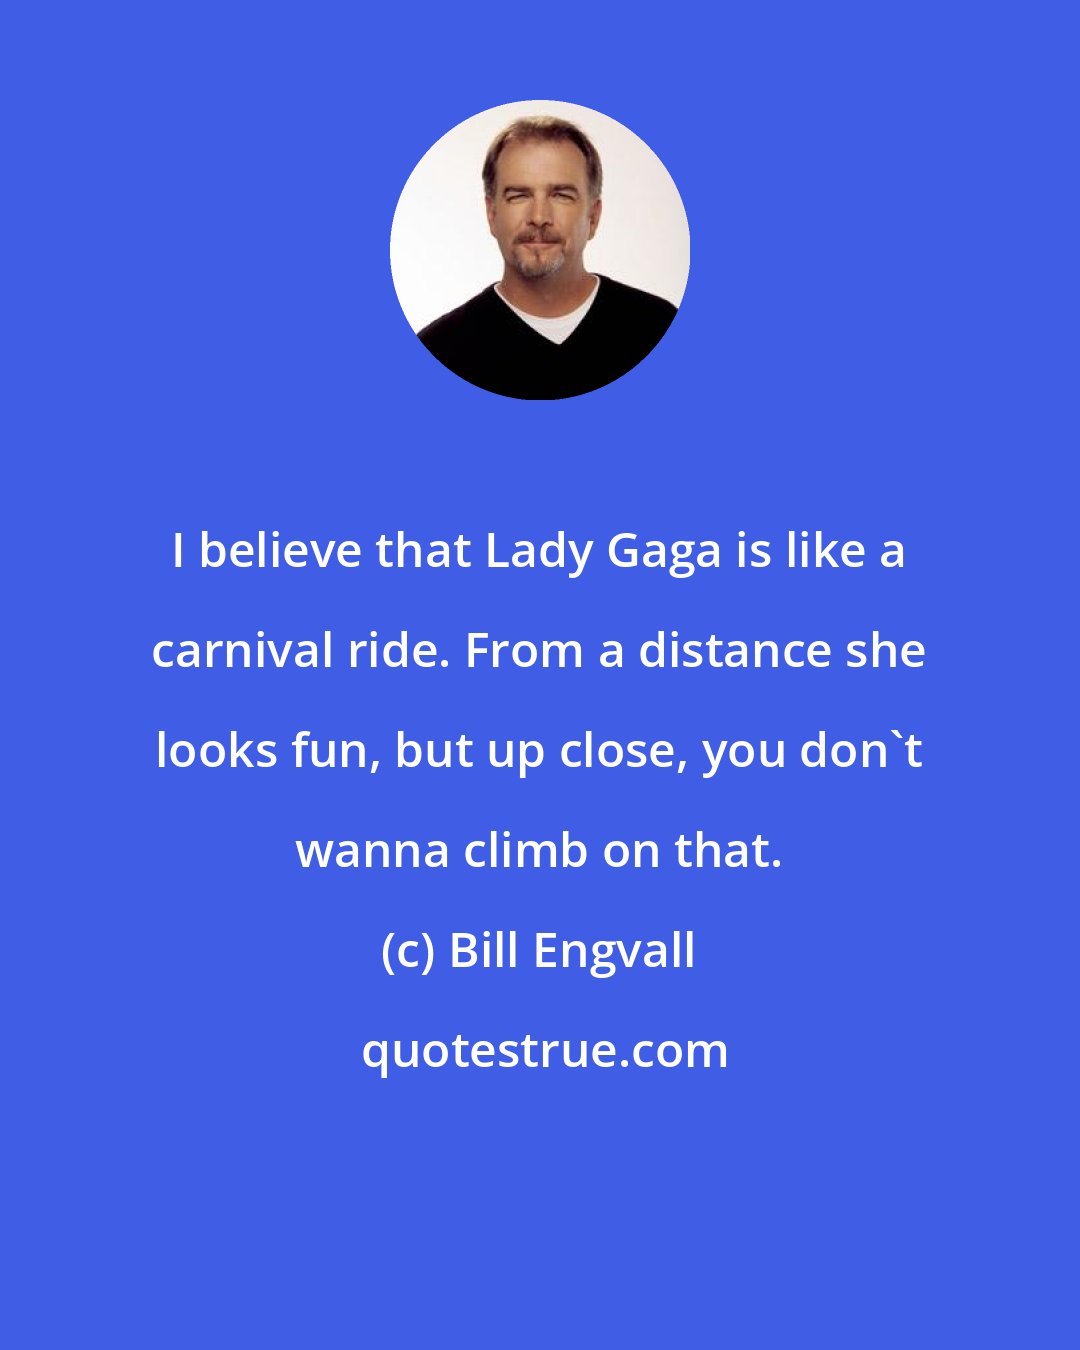 Bill Engvall: I believe that Lady Gaga is like a carnival ride. From a distance she looks fun, but up close, you don't wanna climb on that.